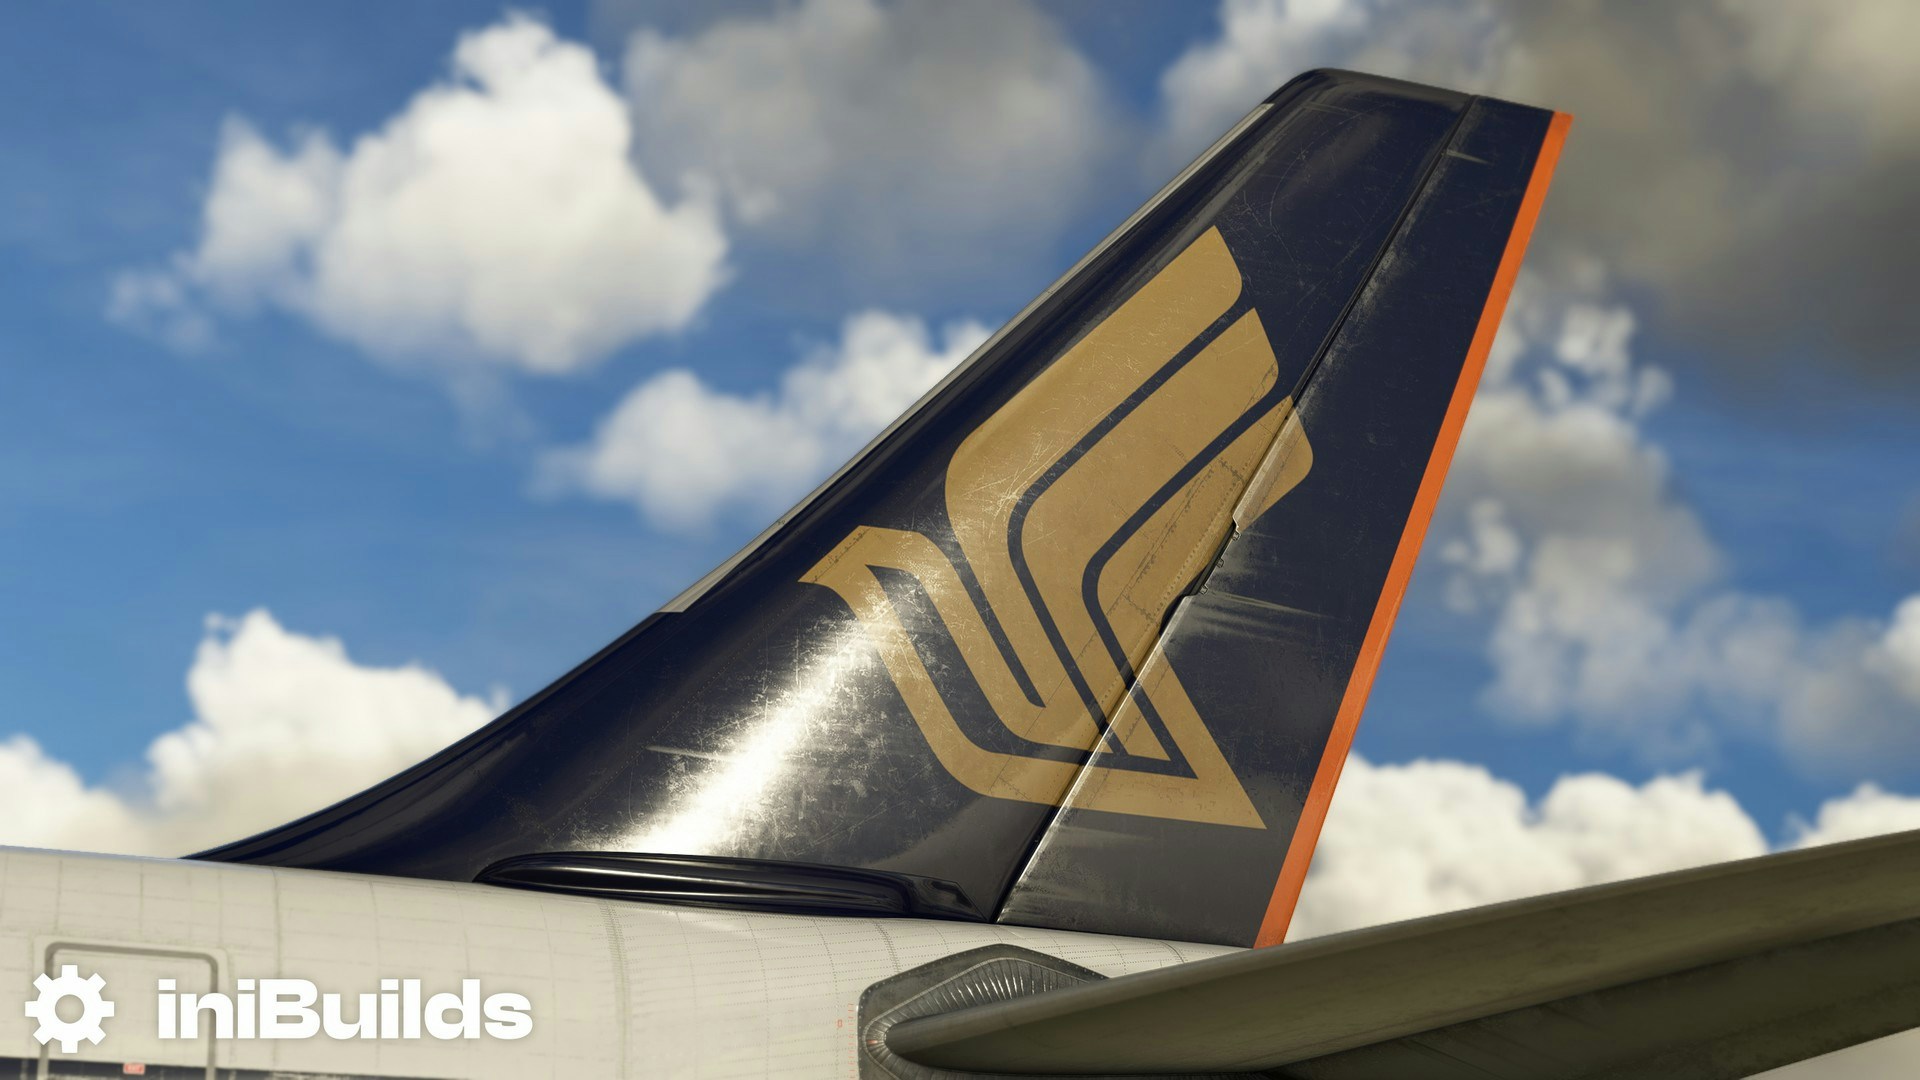 iniBuilds Partners with Microsoft to Release the A310 as a FREE Aircraft Add-On this November